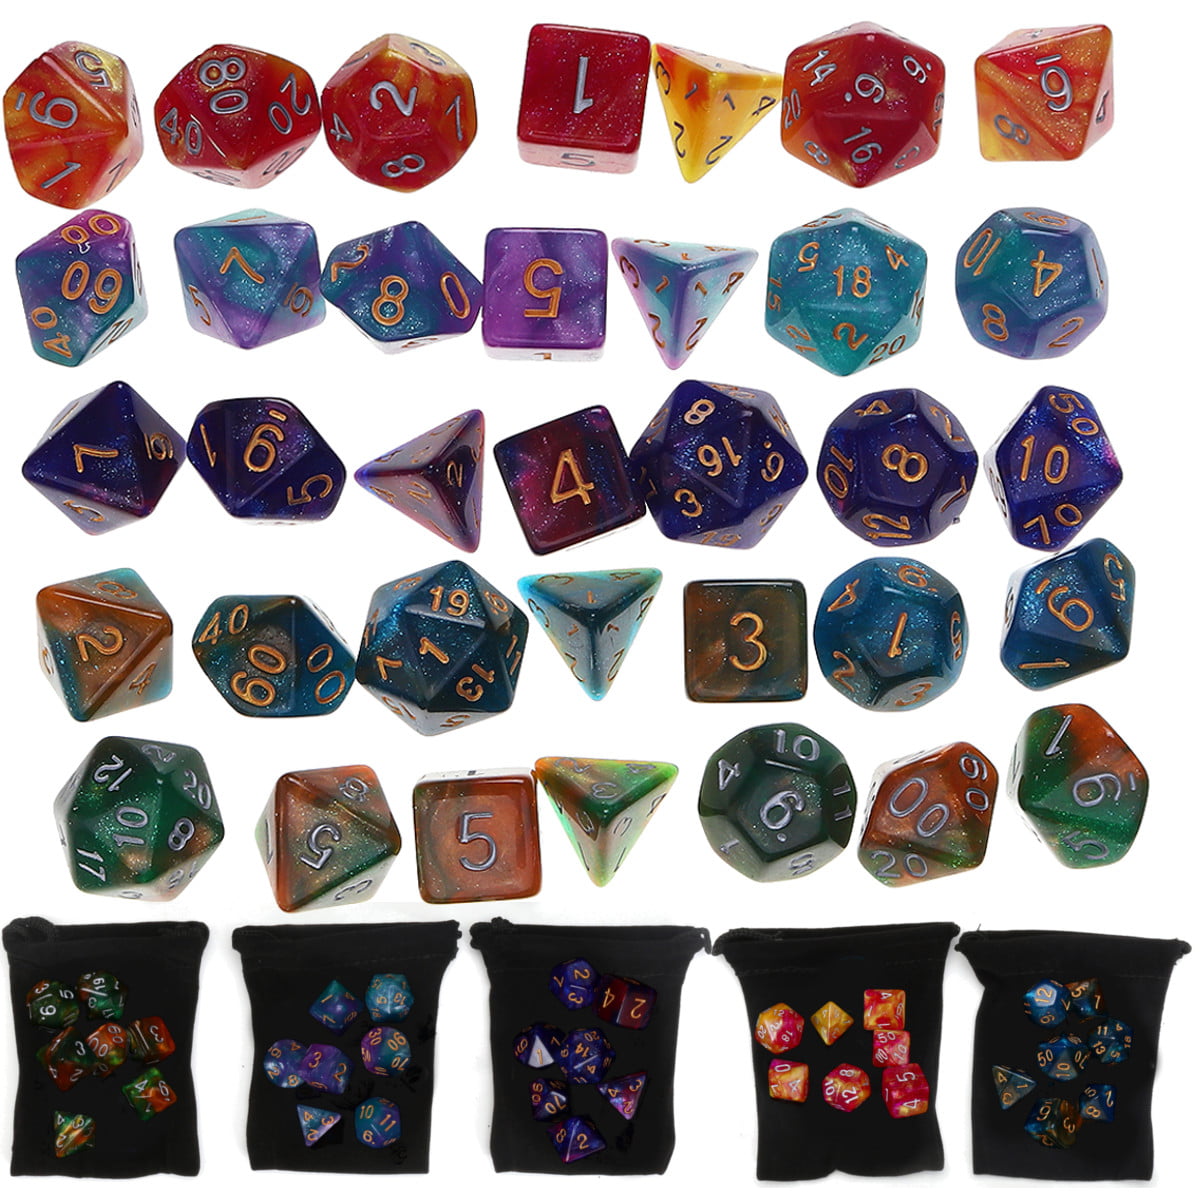 Bag for DND RPG MTG Role Playing Board Game 42pcs/Set Acrylic Polyhedral Dice 